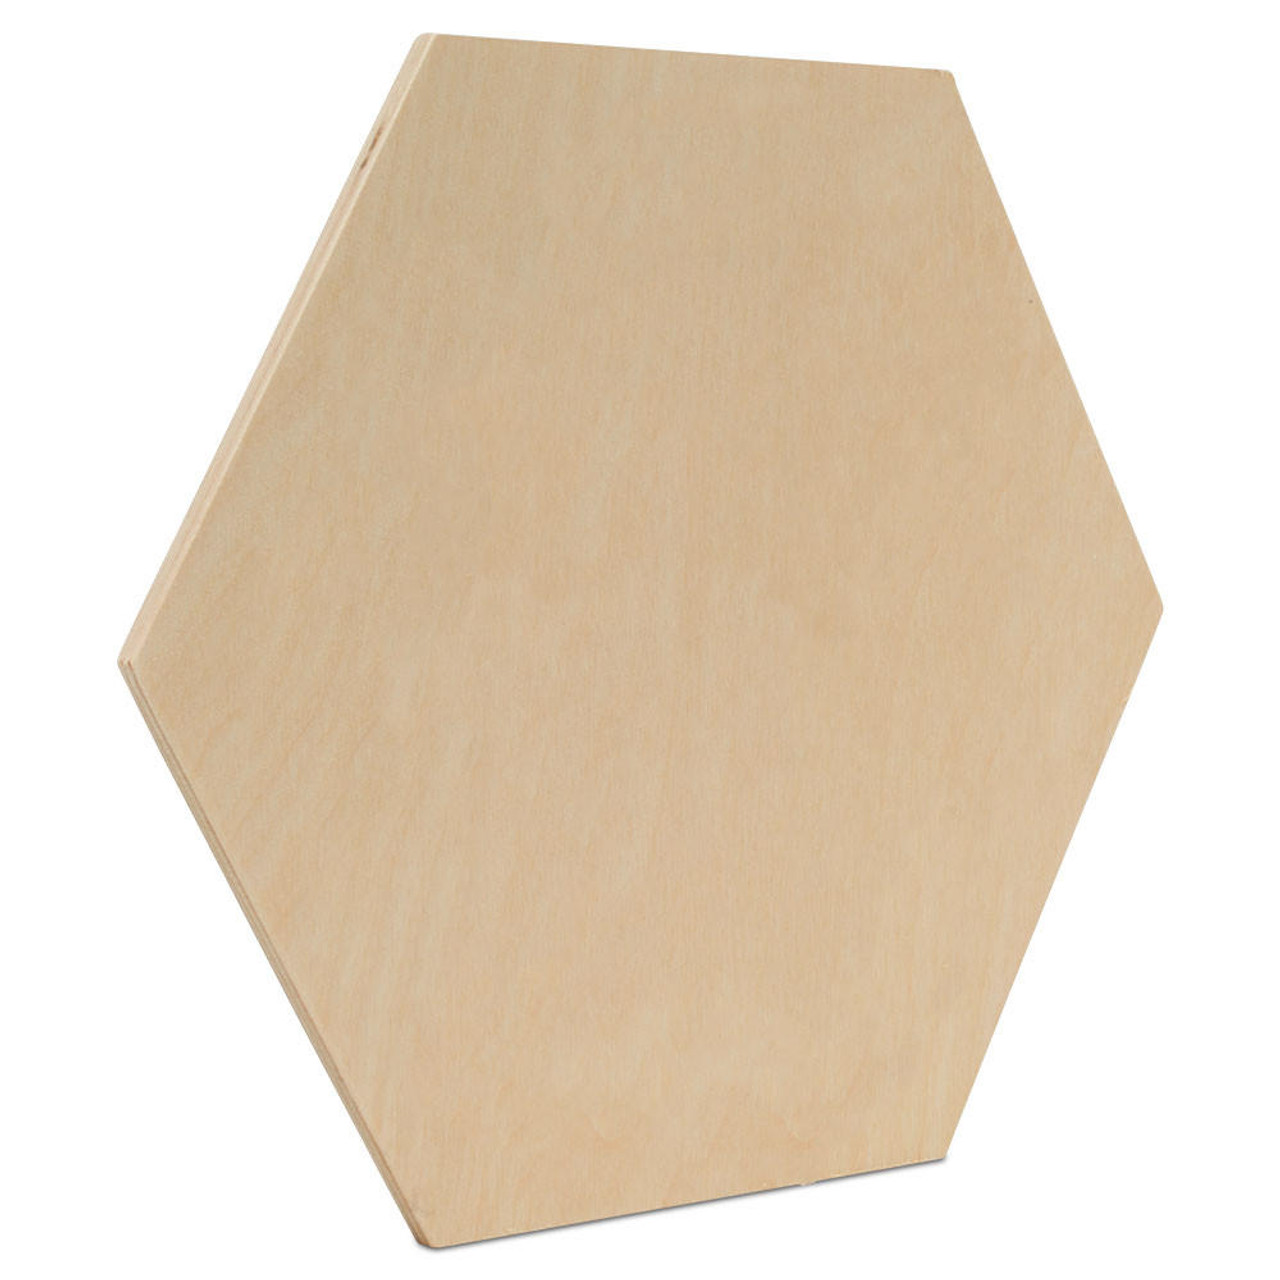 108 PIECES OF craft supplies hexagon unfinished wood, £5.60